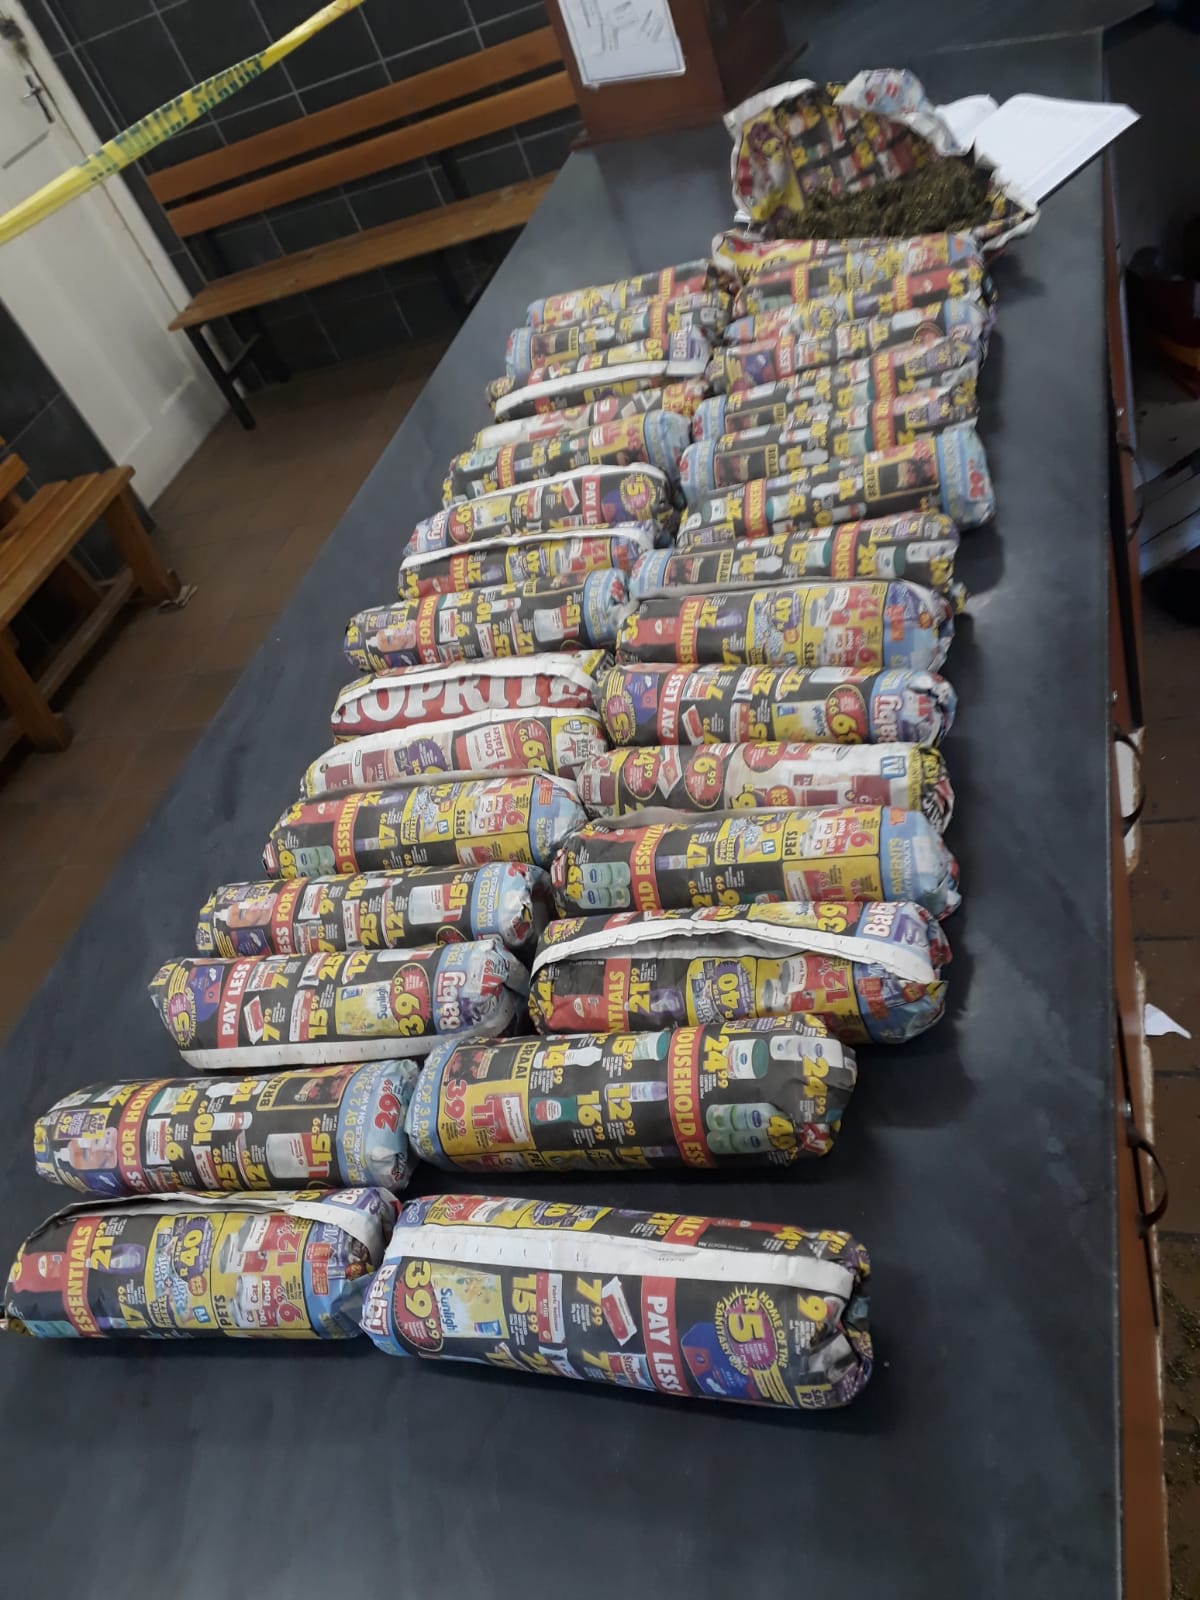 Seven suspect arrested for possession of dagga and a shotgun in East London